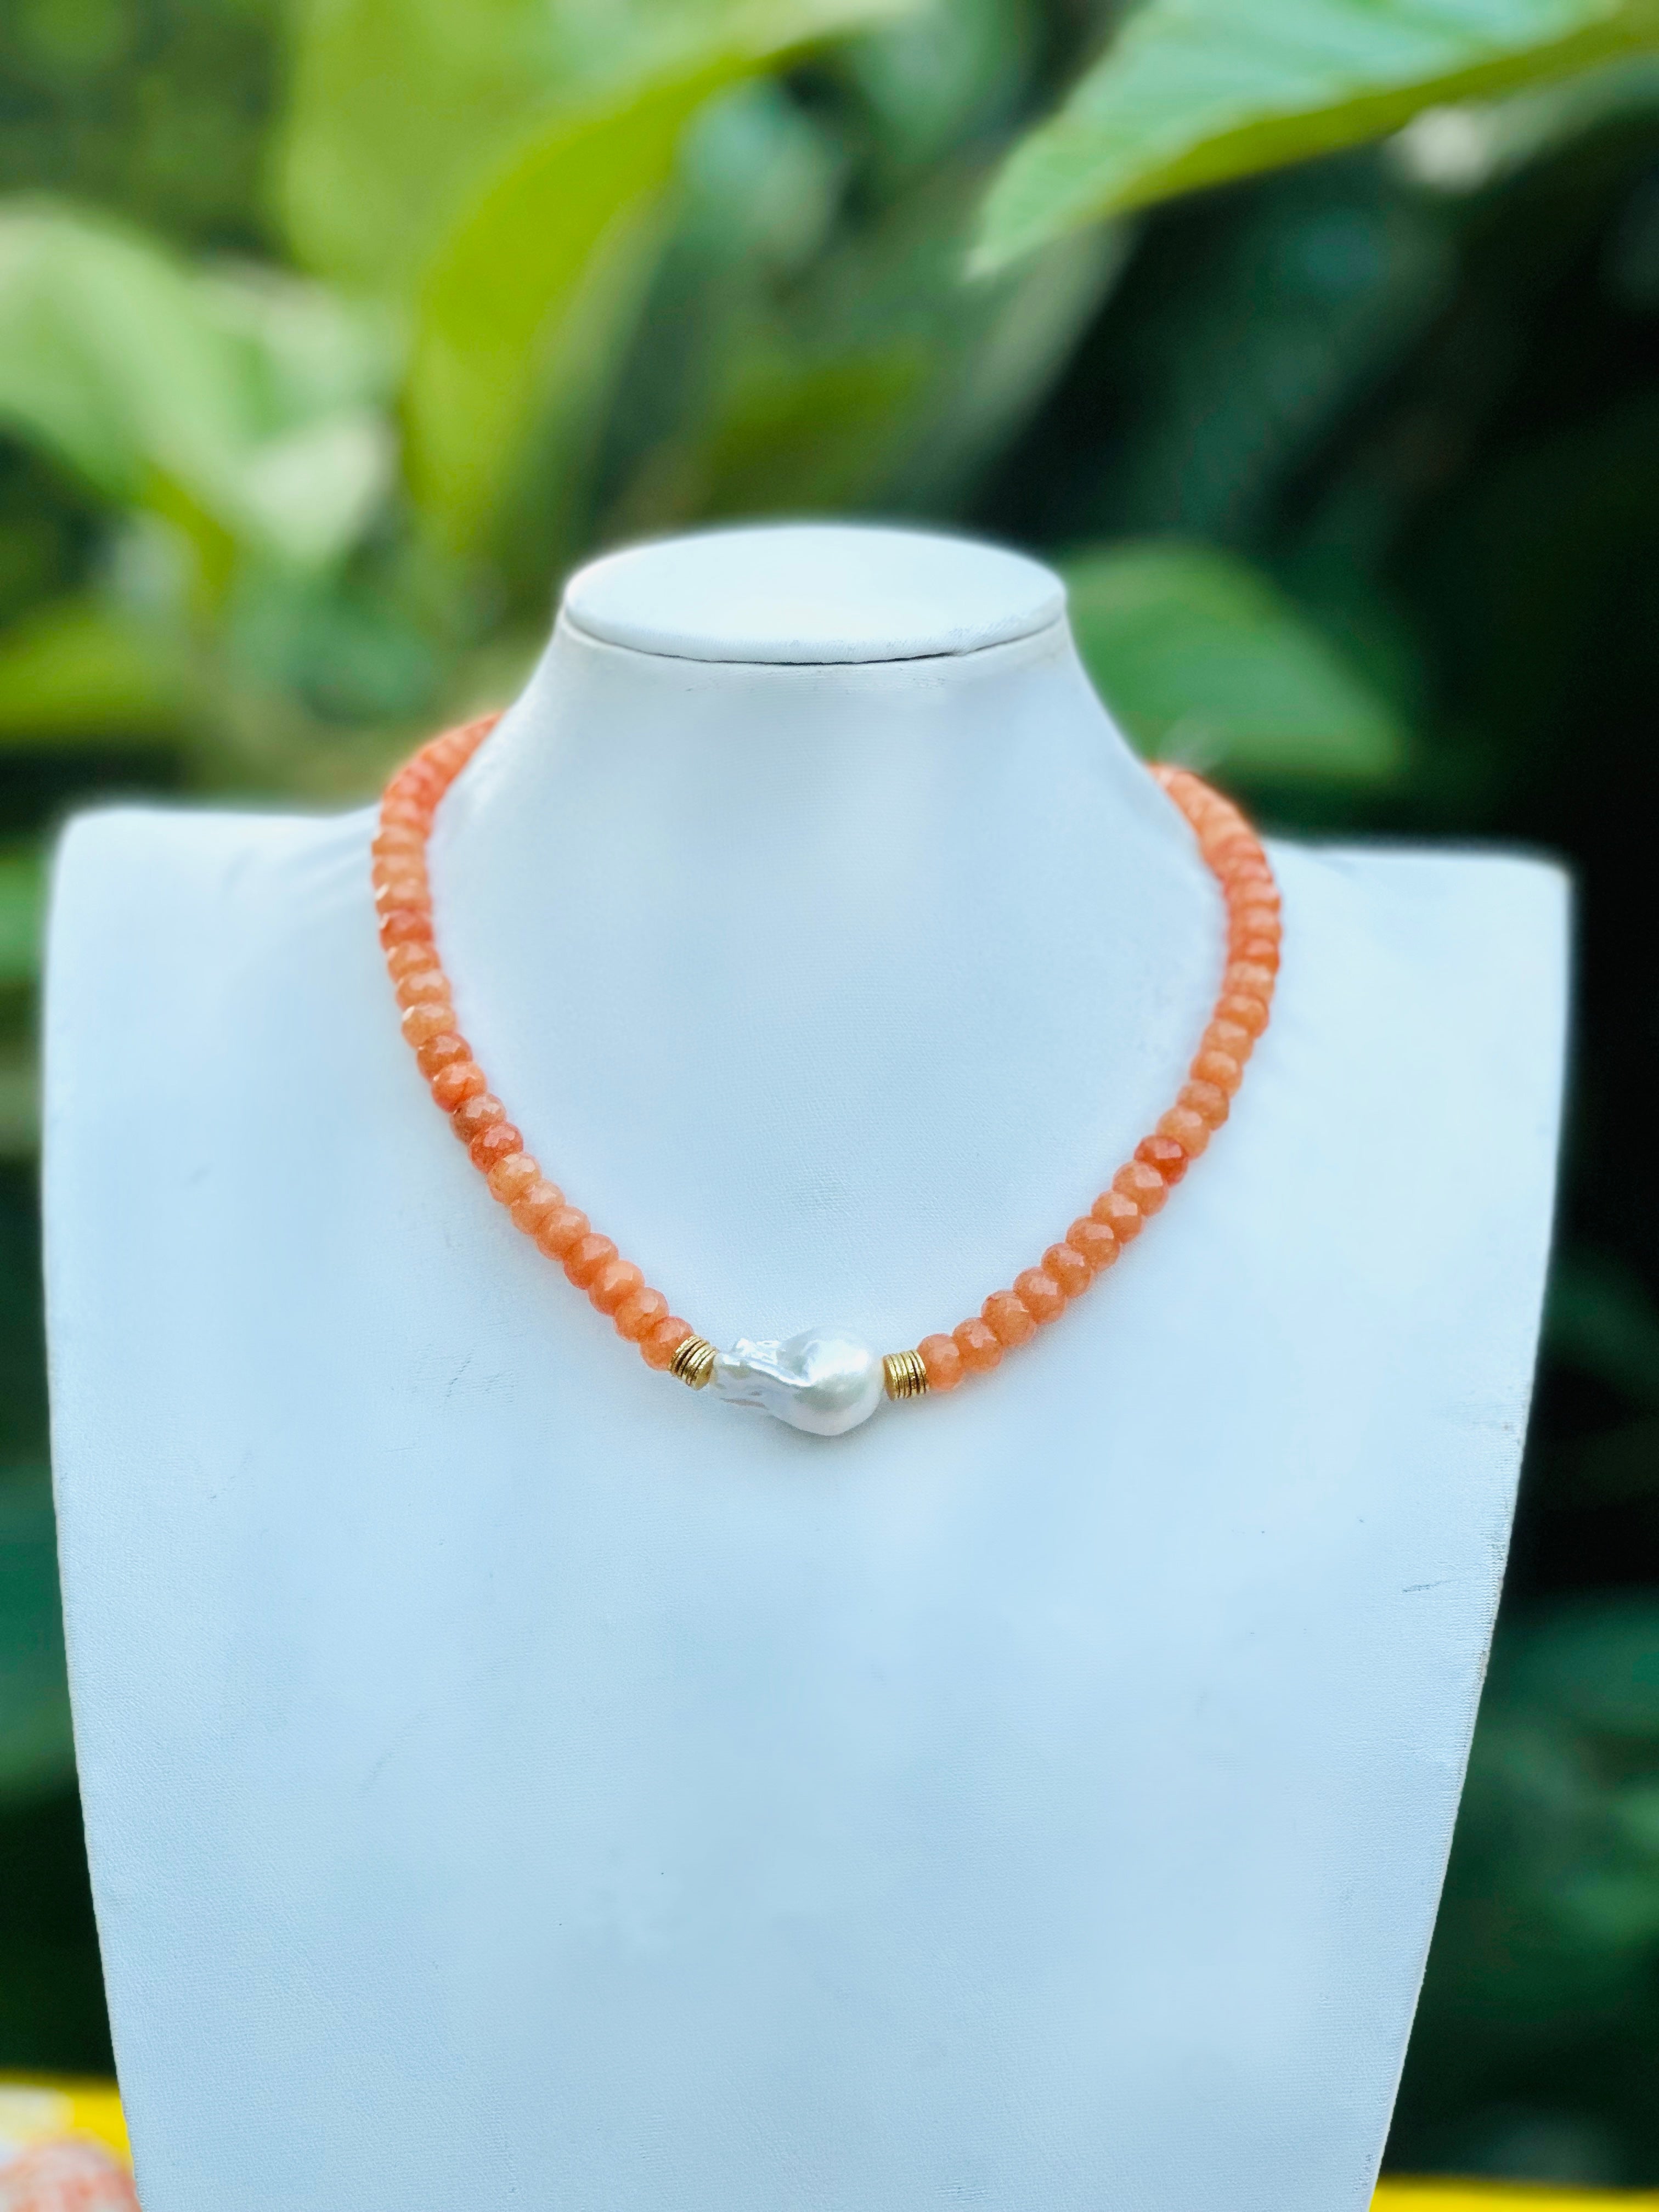 The Adeline necklace ￼